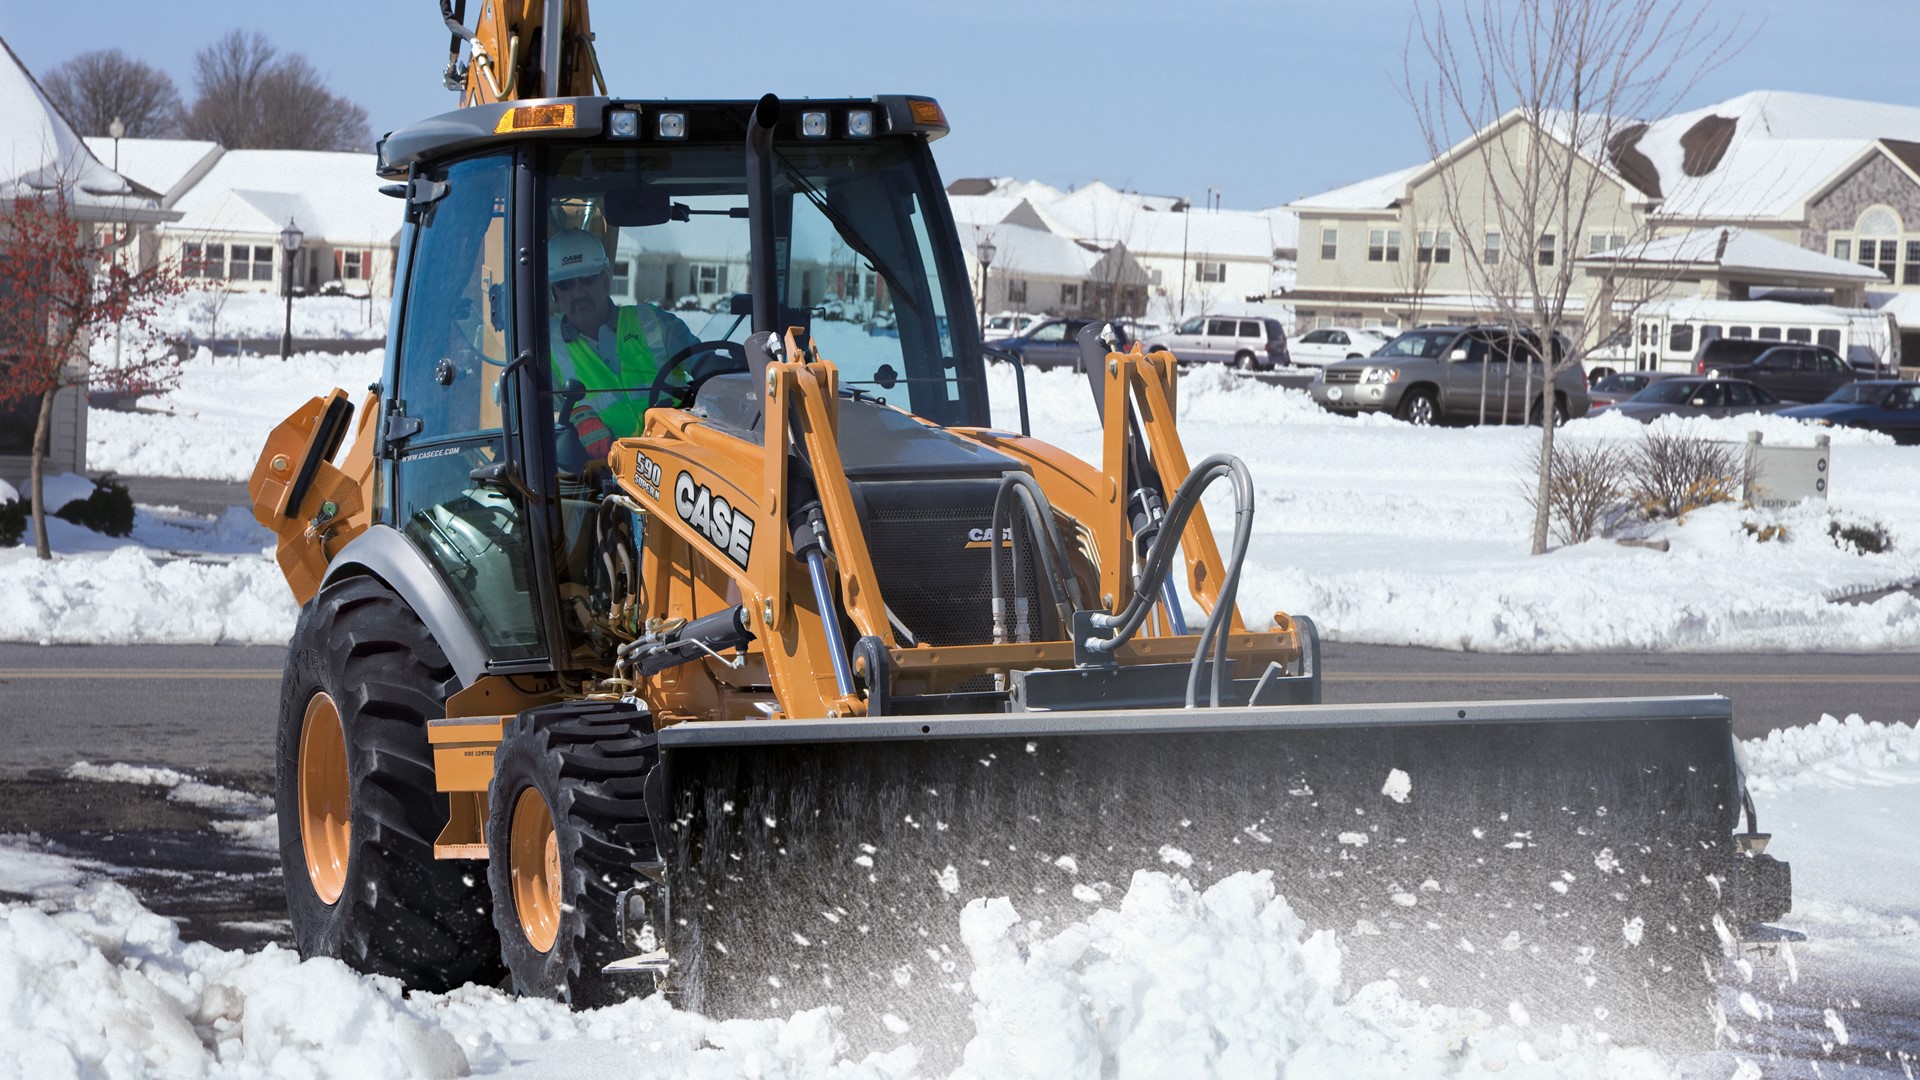 CASE 590 SN Backhoe Loader conducting snow removal